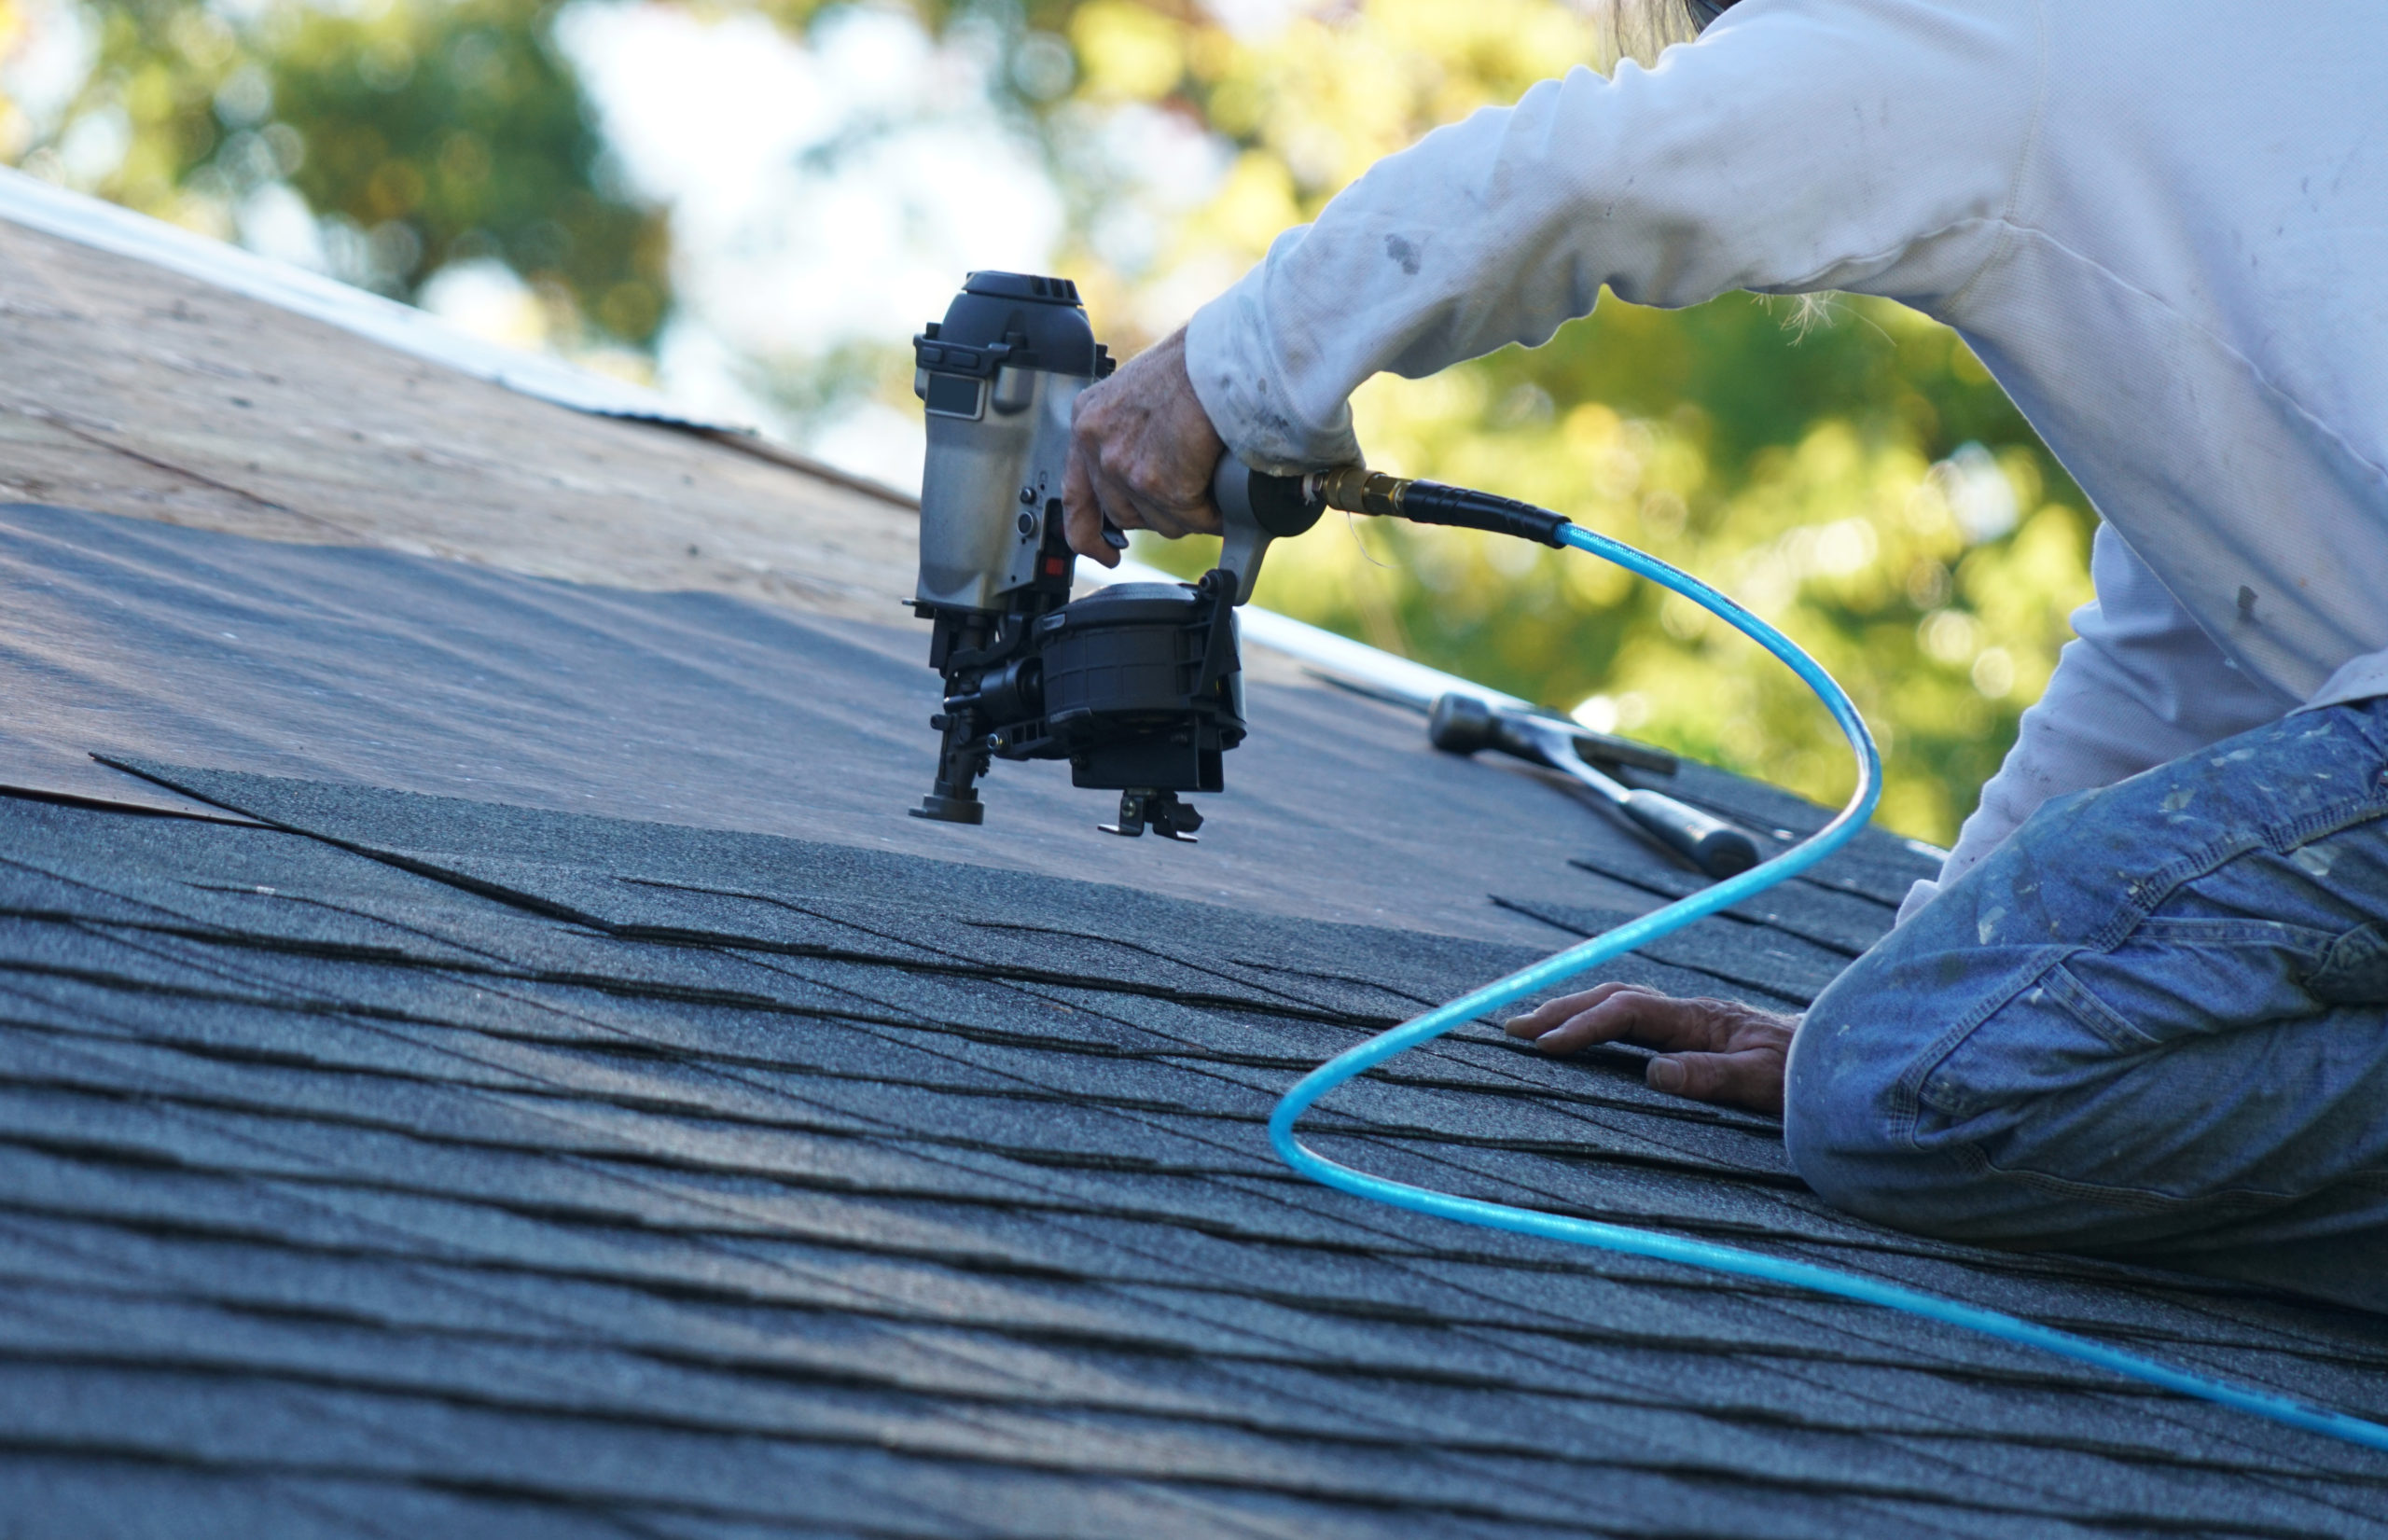 ROOFING INSTALLATION AND REPAIR